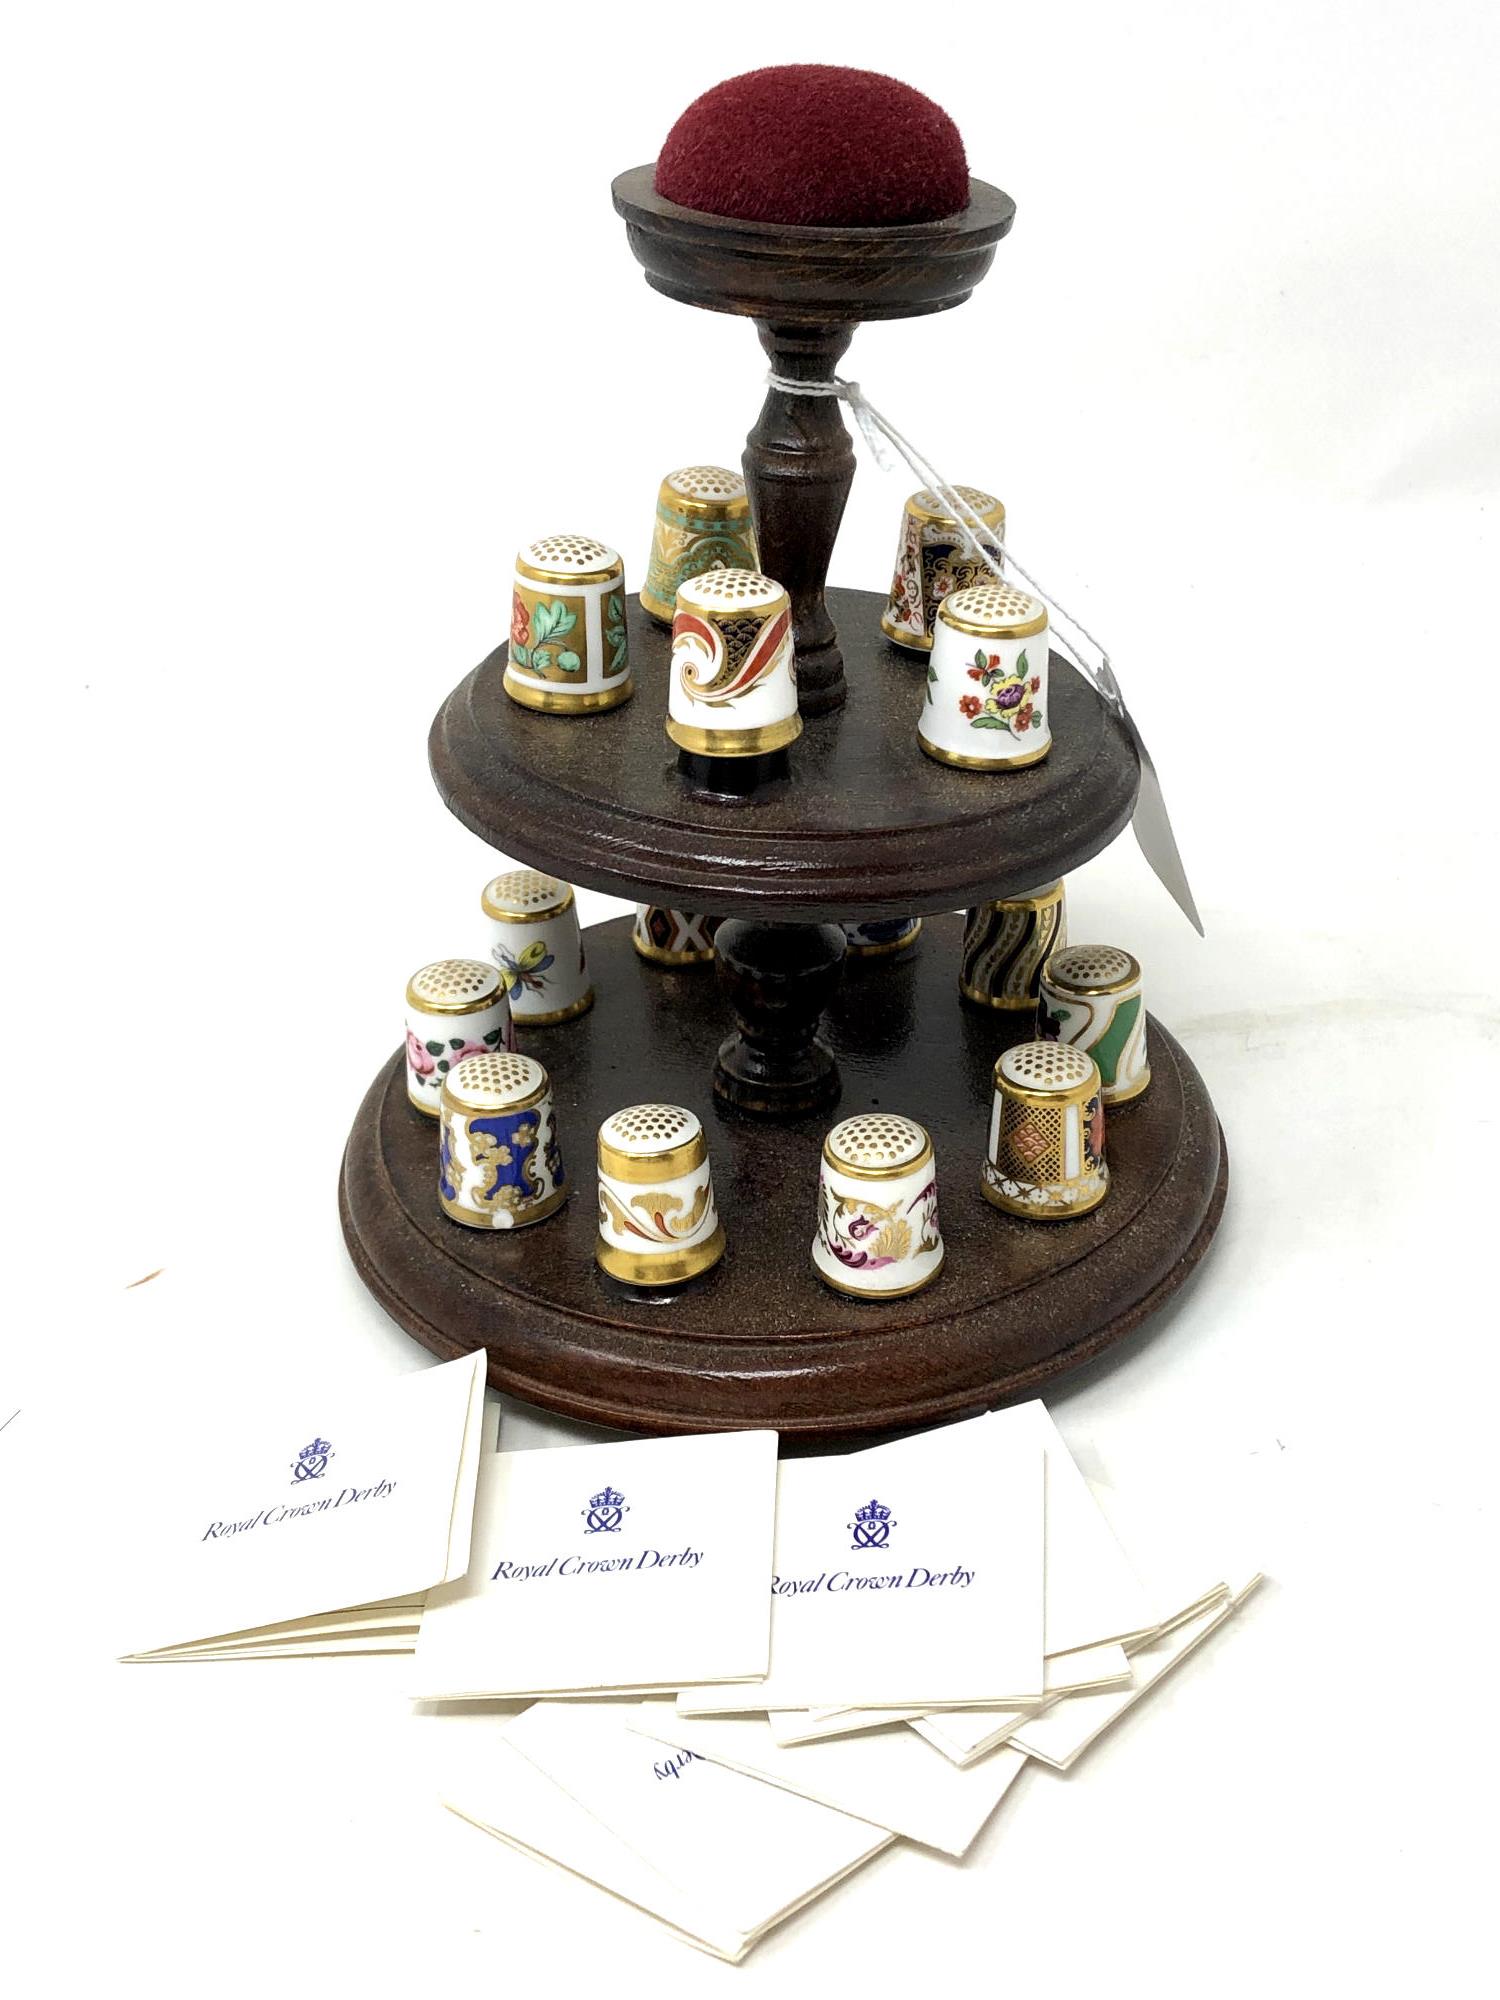 A collection of fifteen Royal Crown Derby porcelain thimbles on display stand with certificates